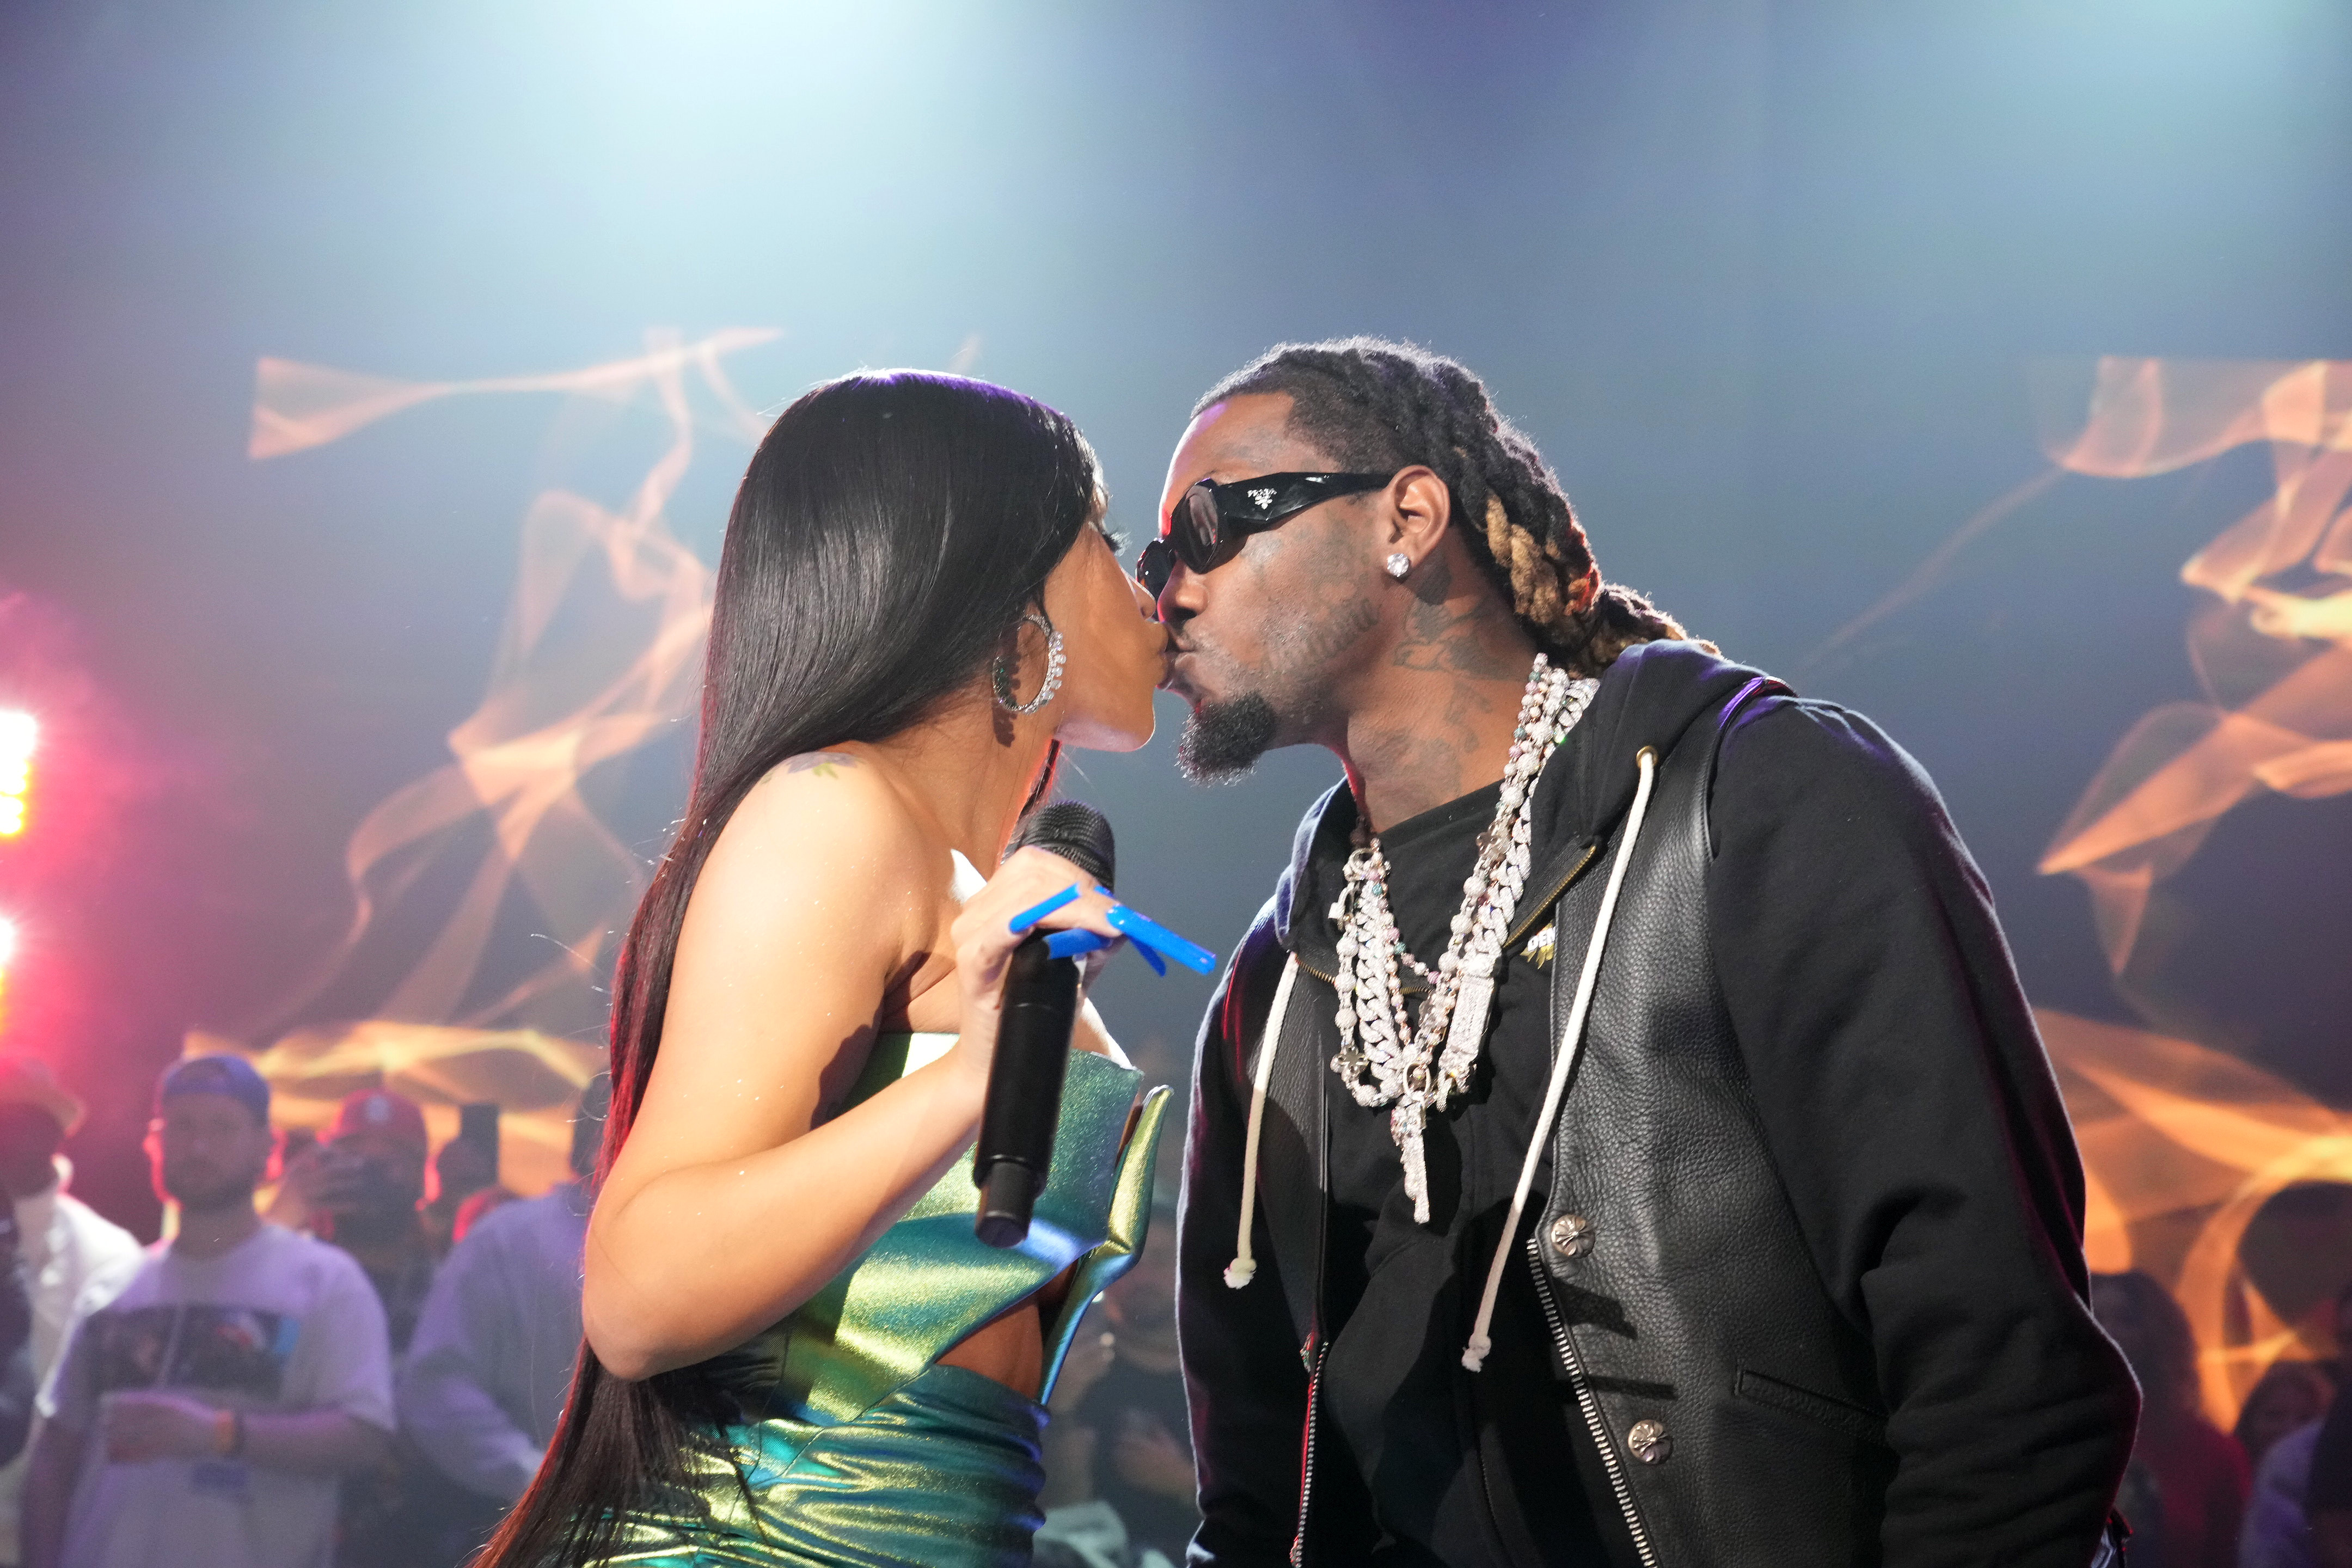 Cardi B and Offset perform at the Headline Hall of Fame Party on February 11, 2023, in Chandler, Arizona | Source: Getty Images